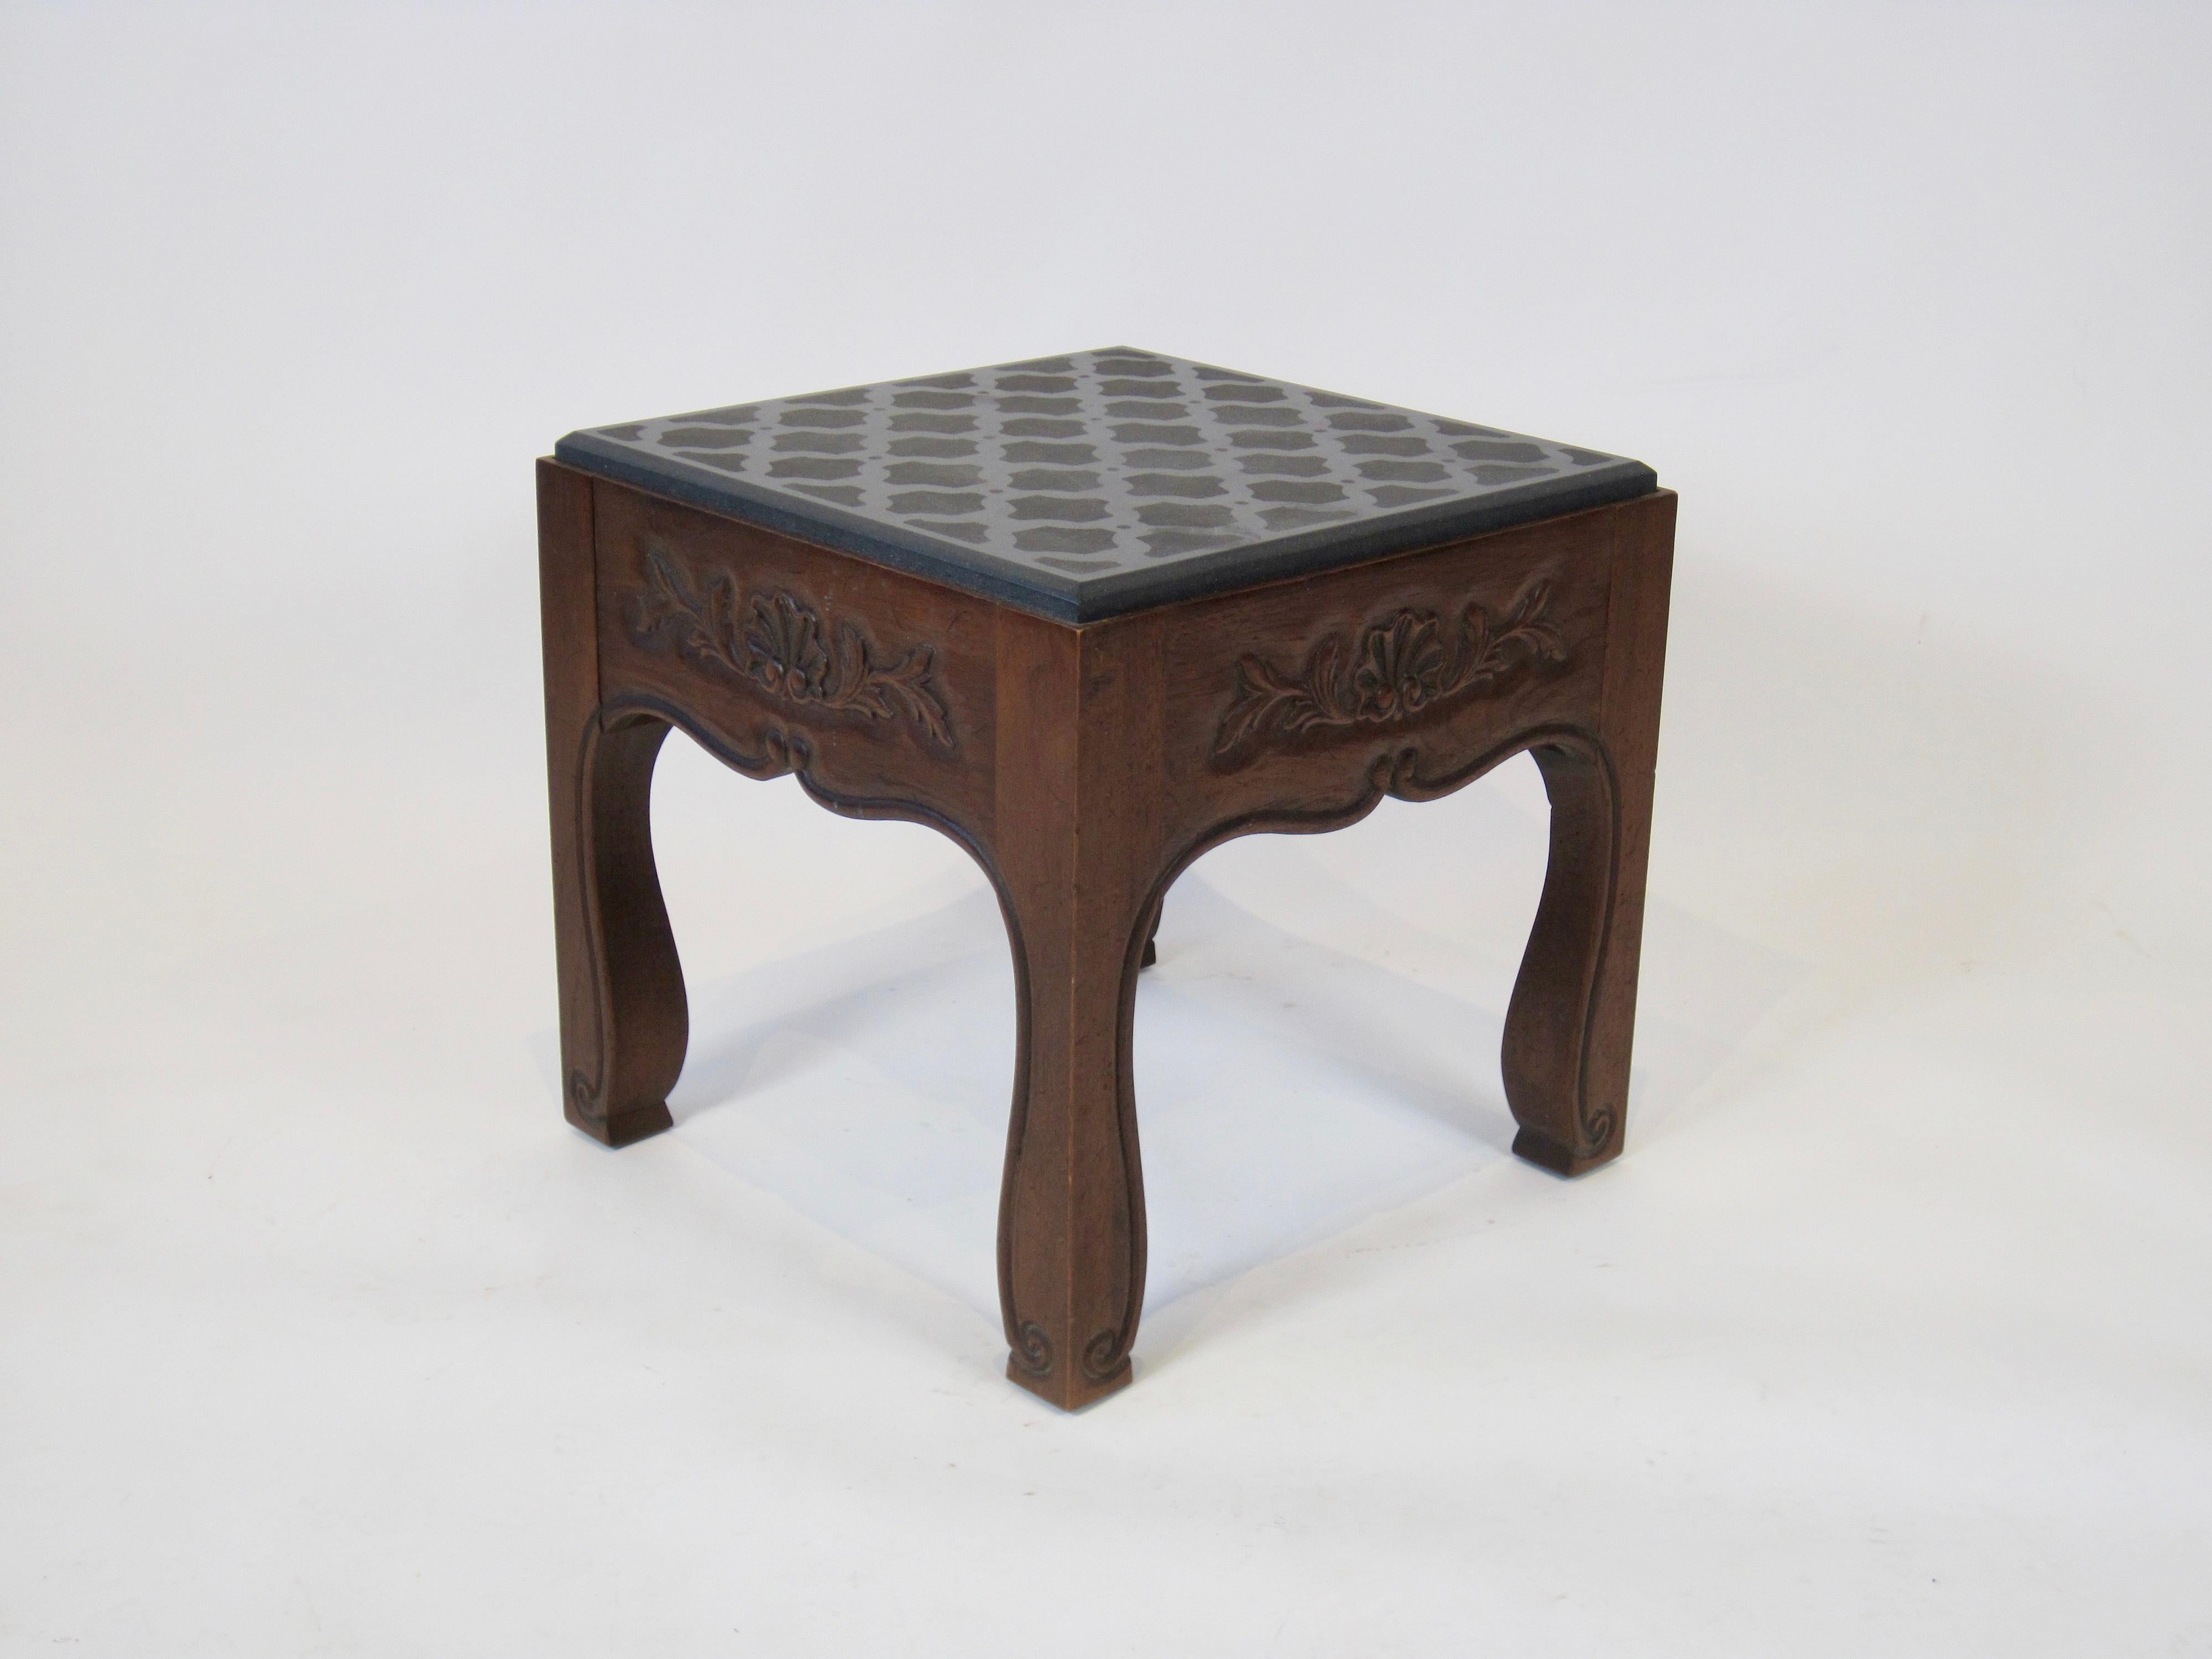 American Nouveau Inspired Drexel Side Table with Stone Top